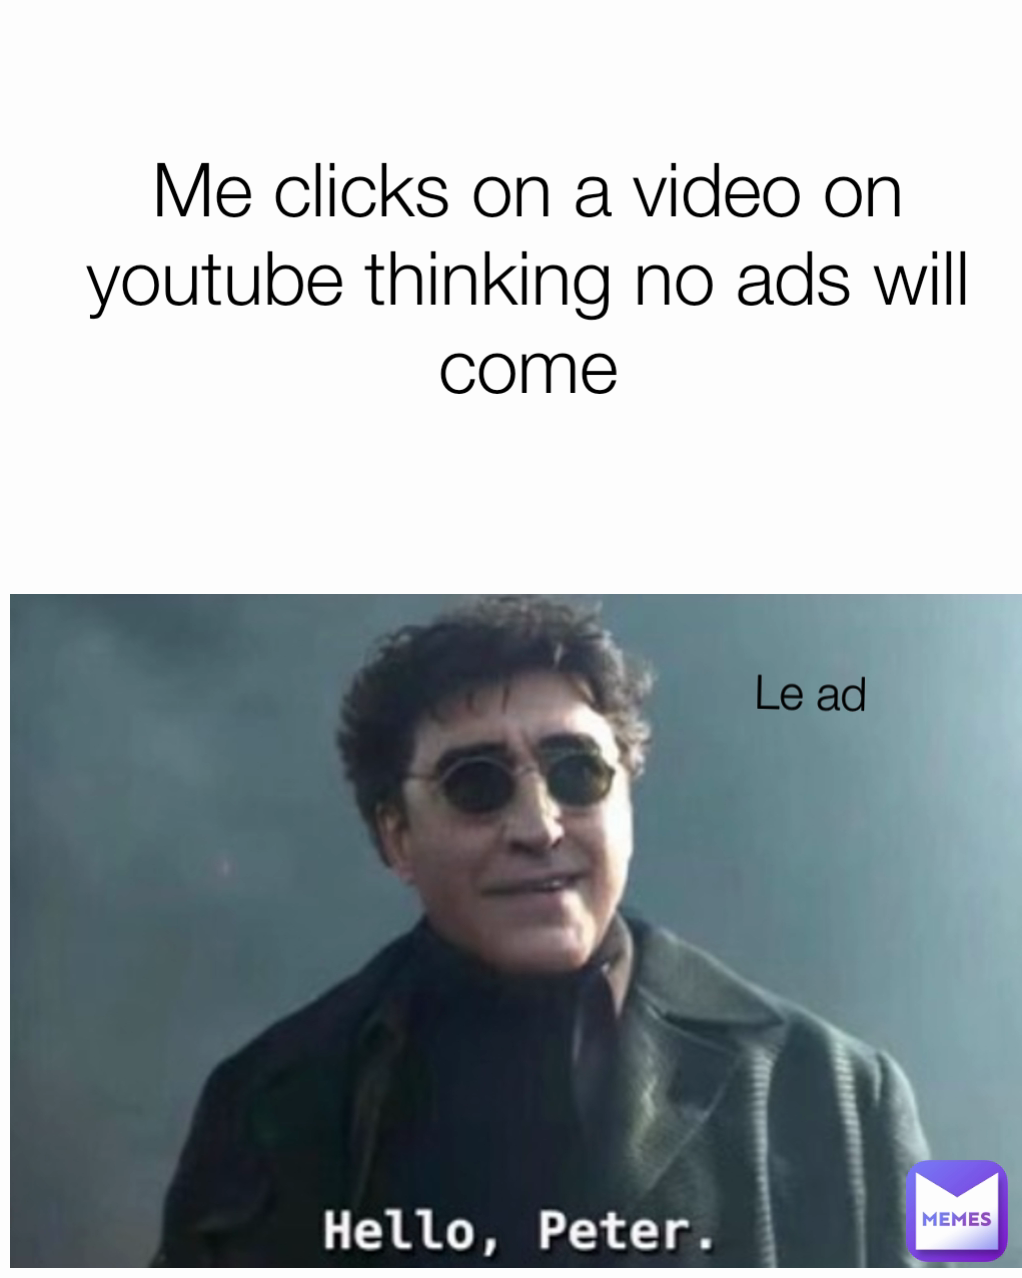 Me clicks on a video on youtube thinking no ads will come Le ad